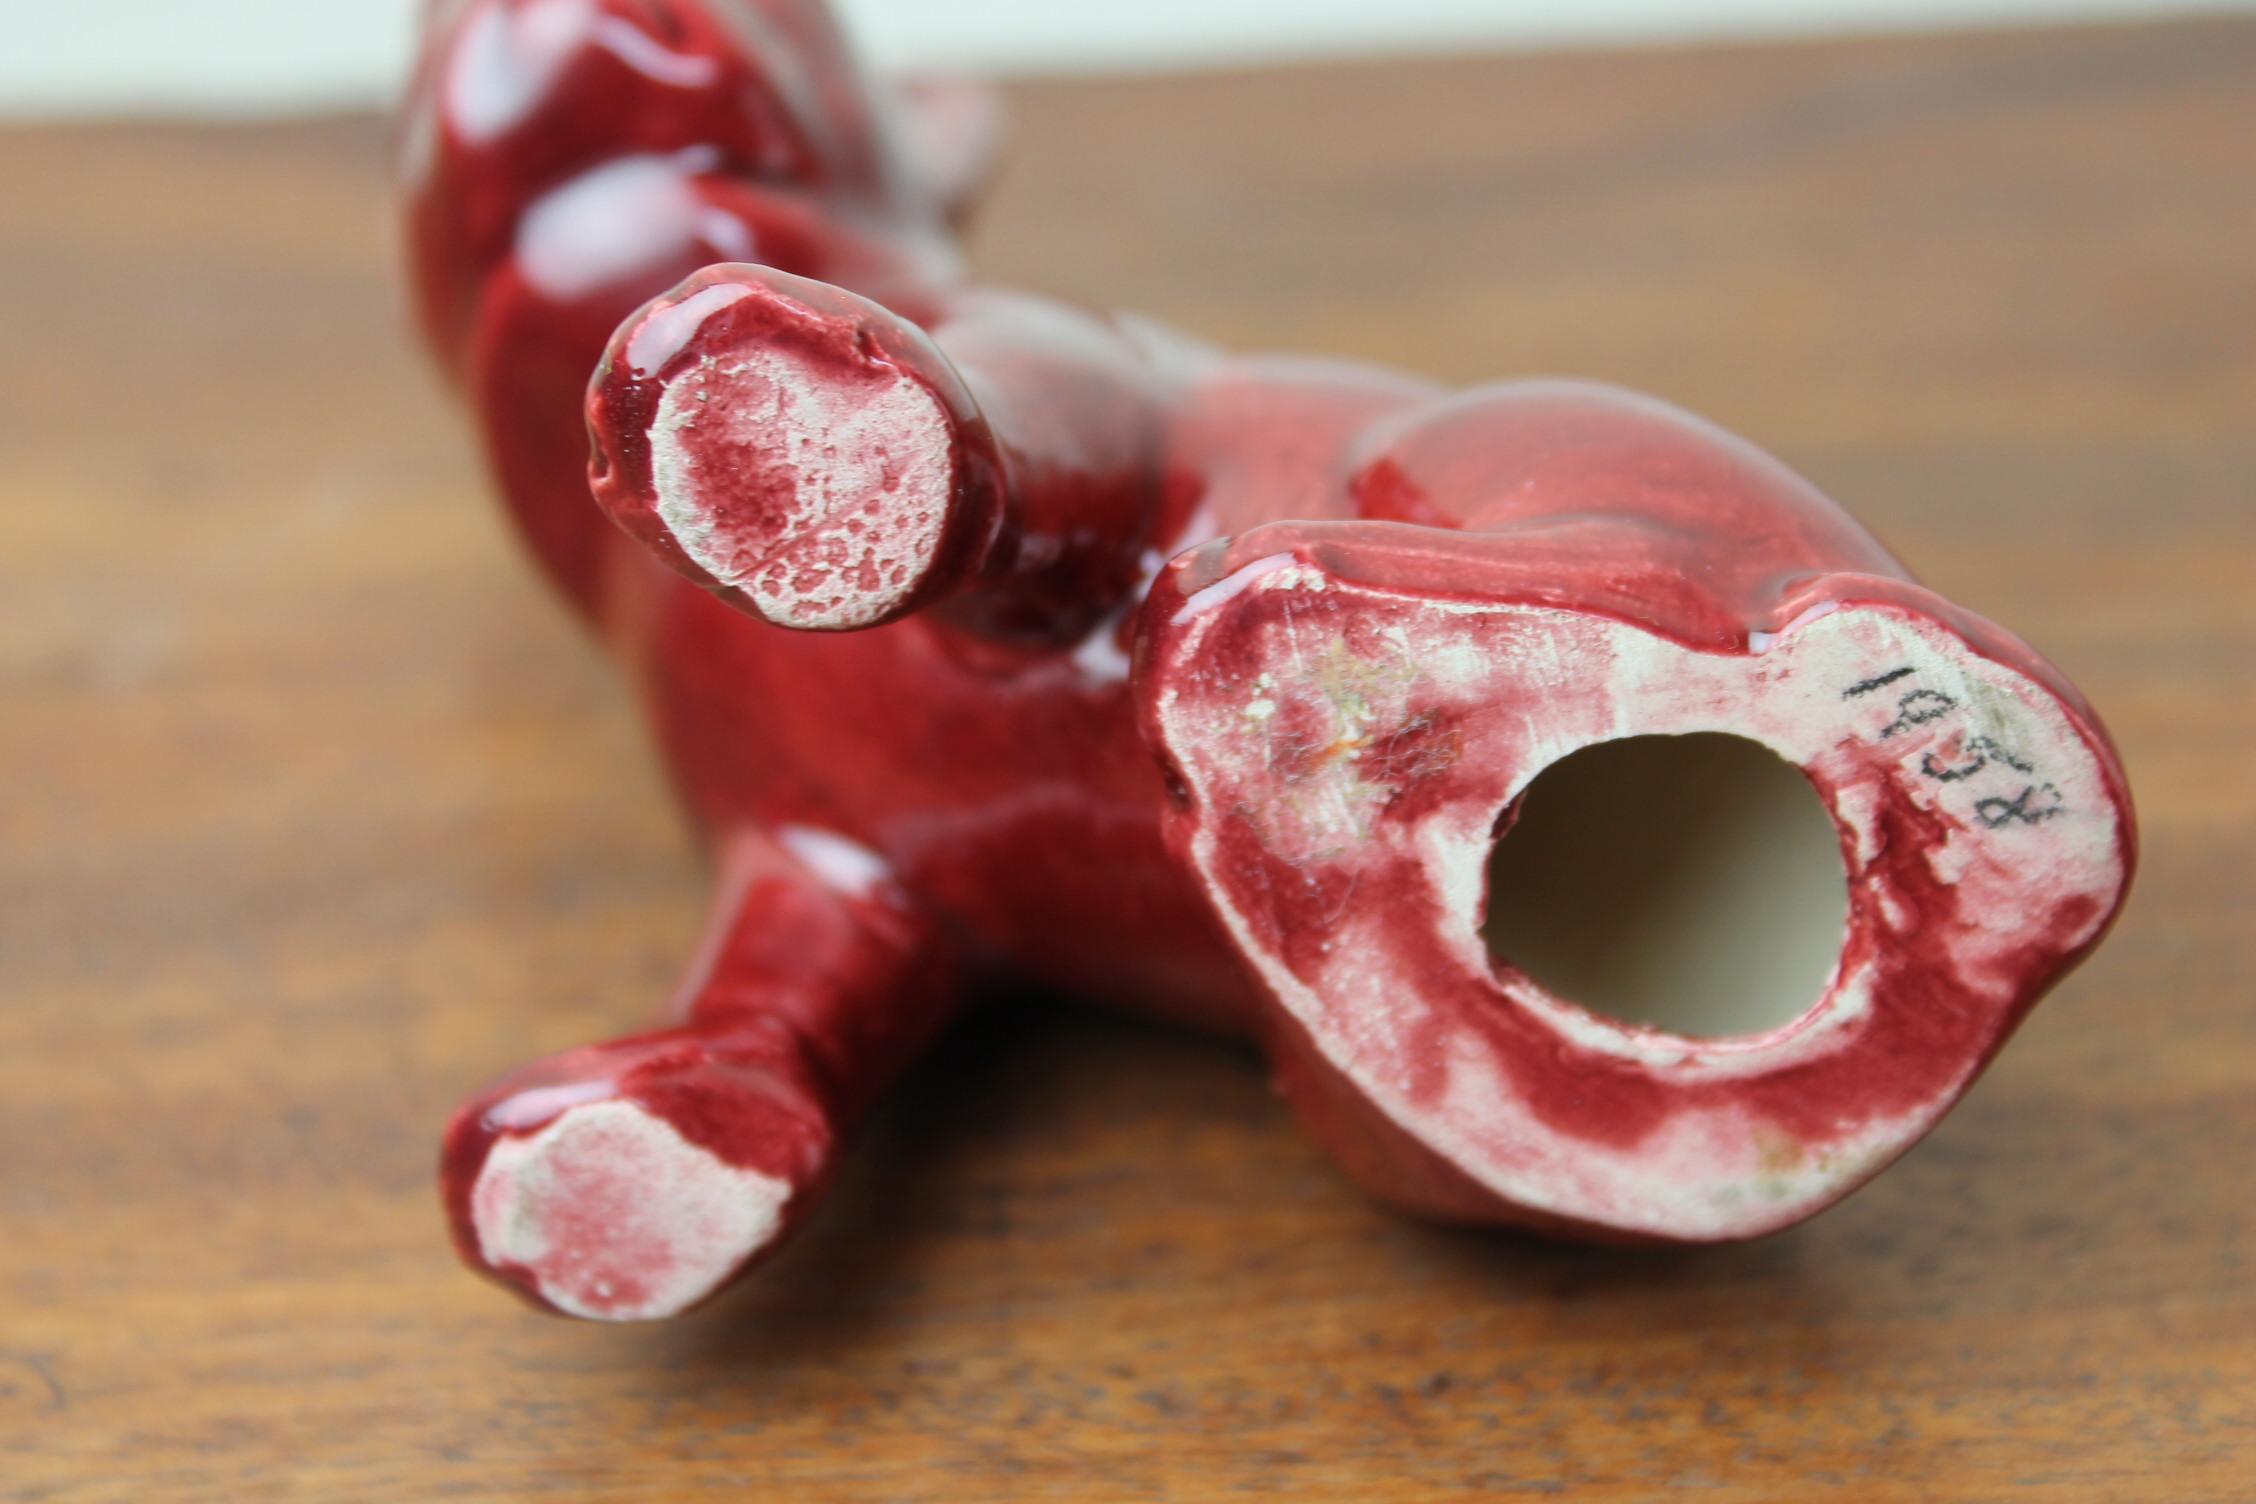 1950s Red-Bordeaux French Bulldog Figurine 2